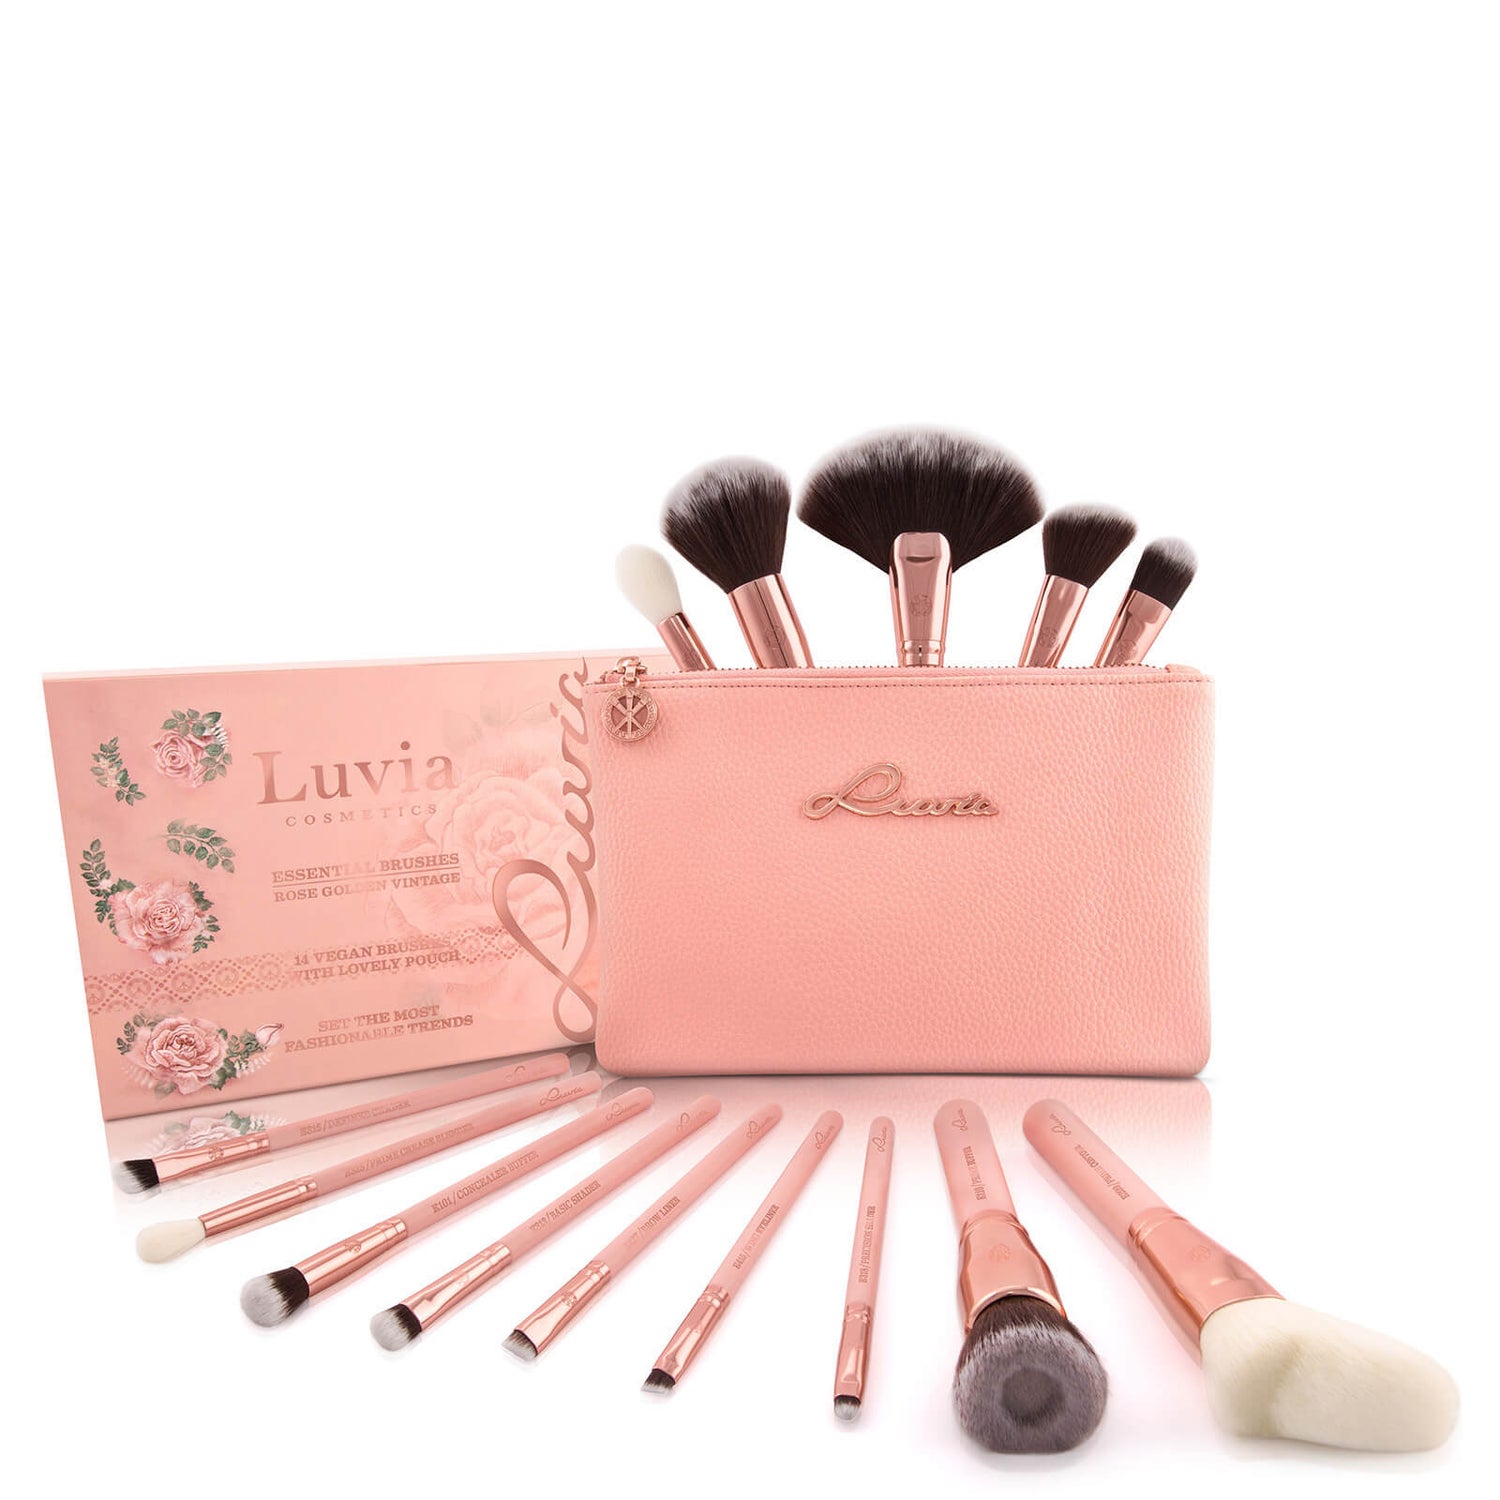 Luvia Essential Brushes Set - Rose Golden Vintage | Free US Shipping |  lookfantastic